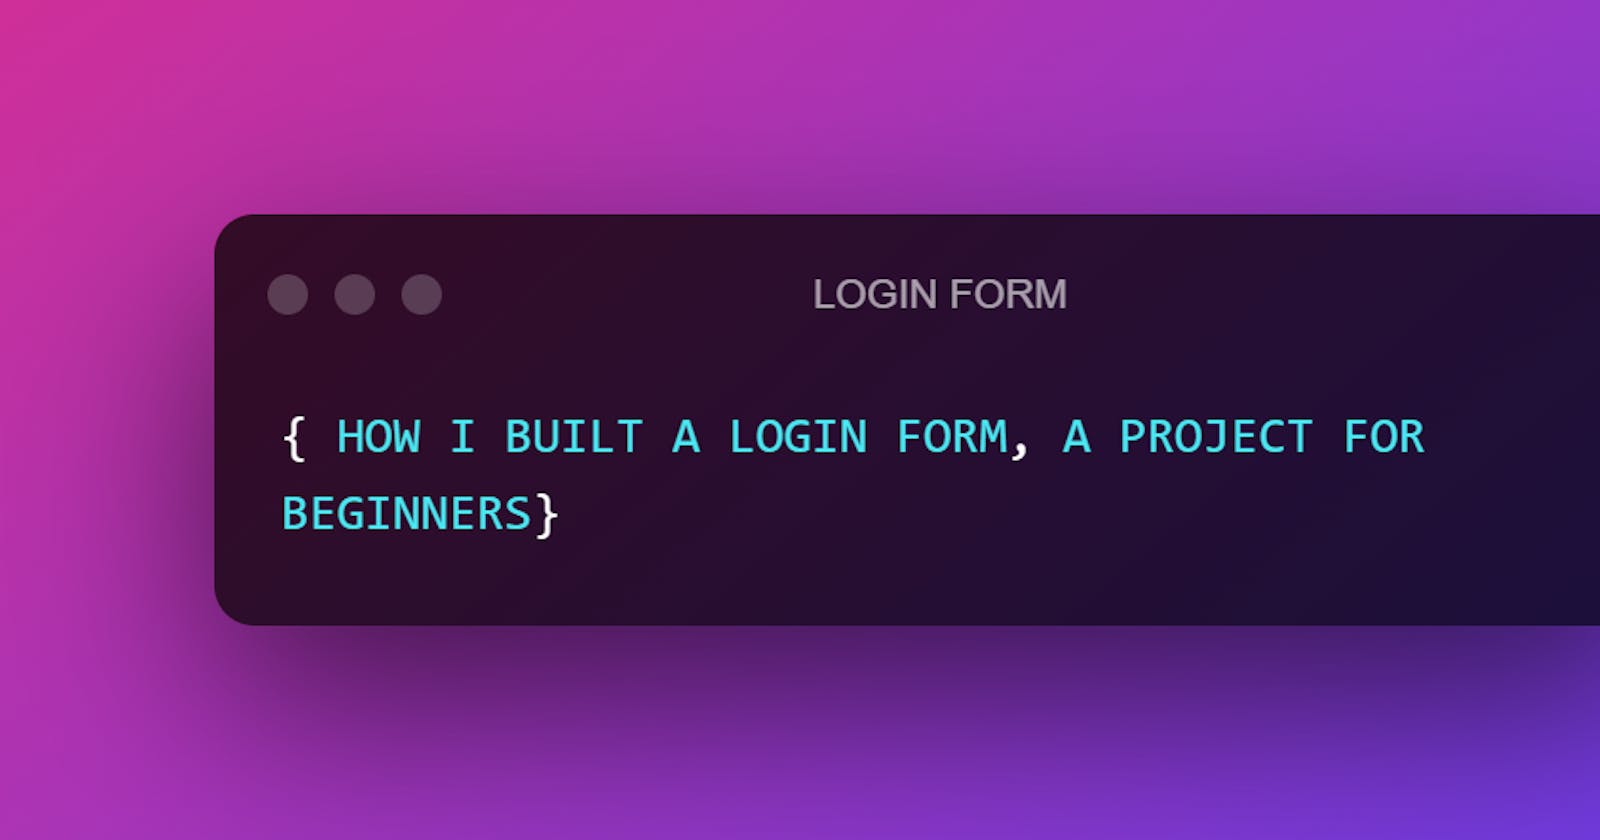 A LOGIN FORM: A Project For Beginners...